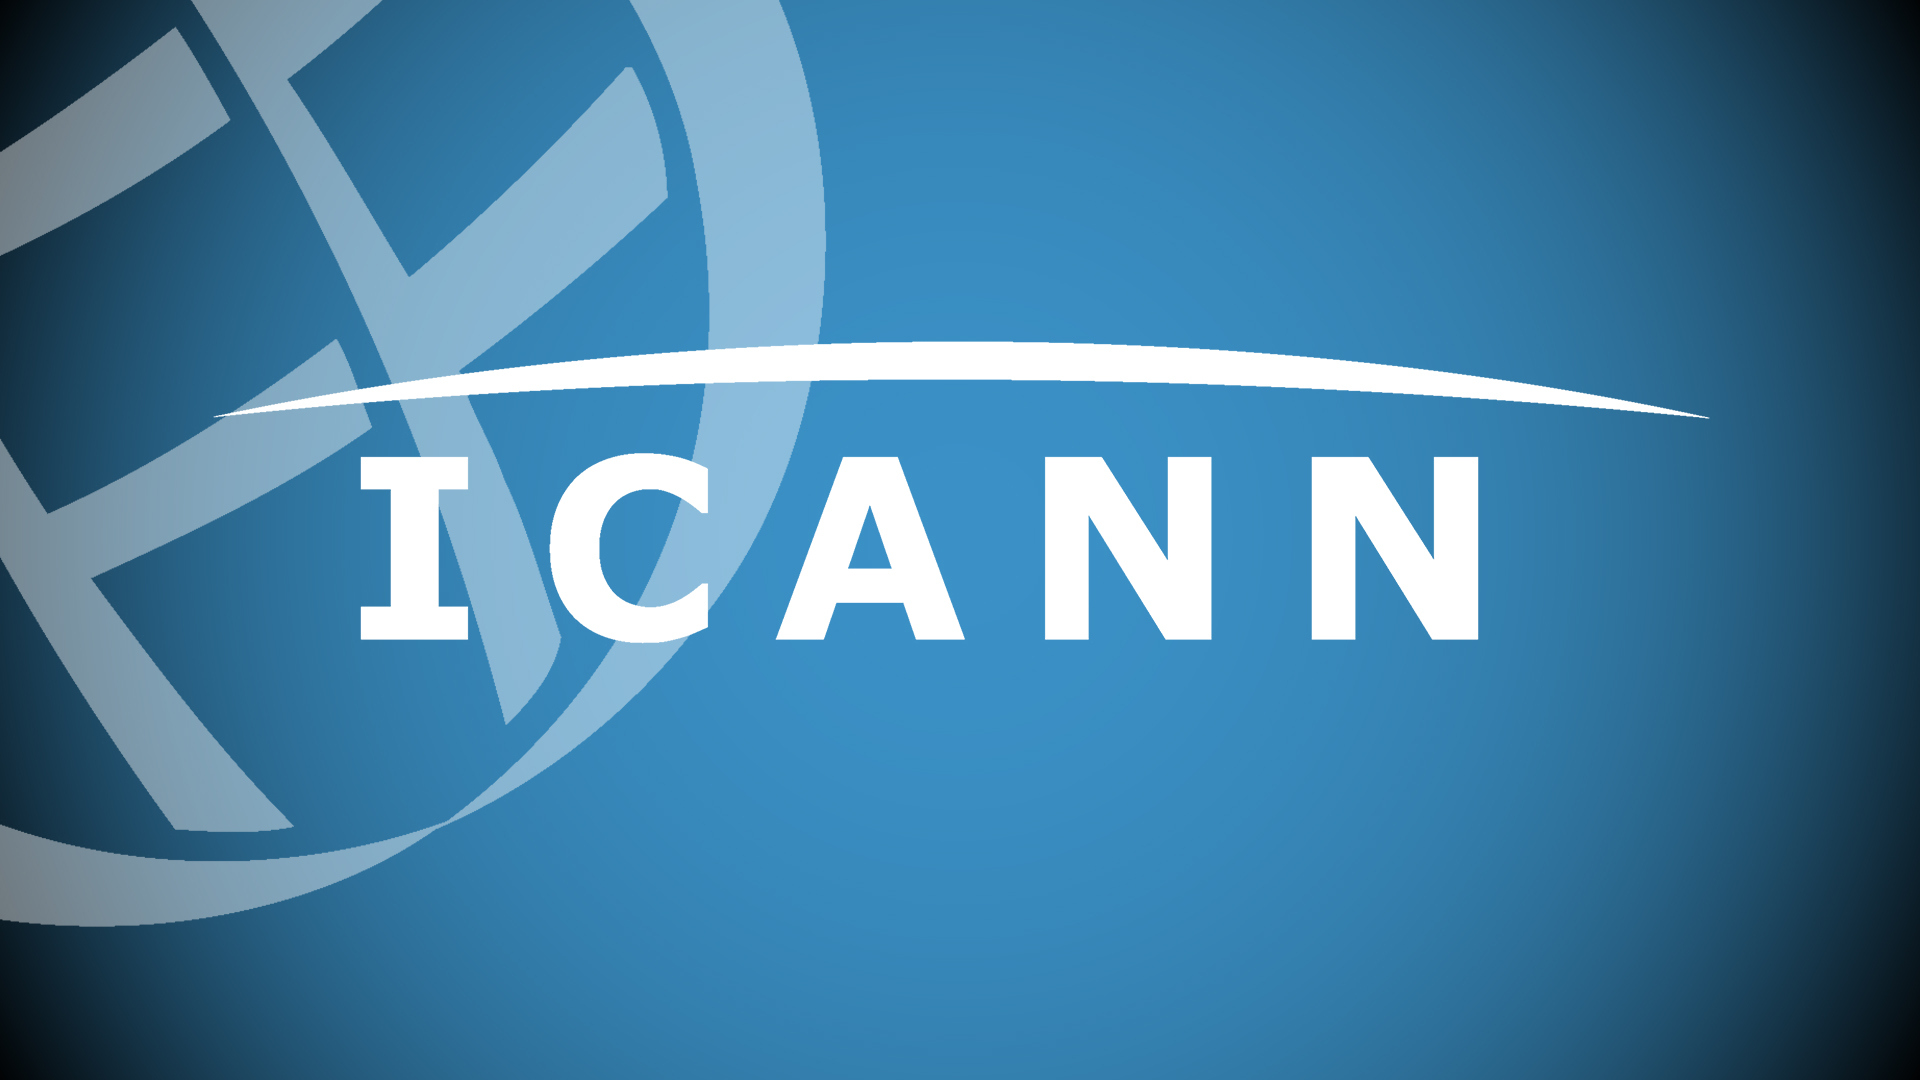 Are your Domain Contact Details up to date for ICANN’s Policy Update on the 1st December?